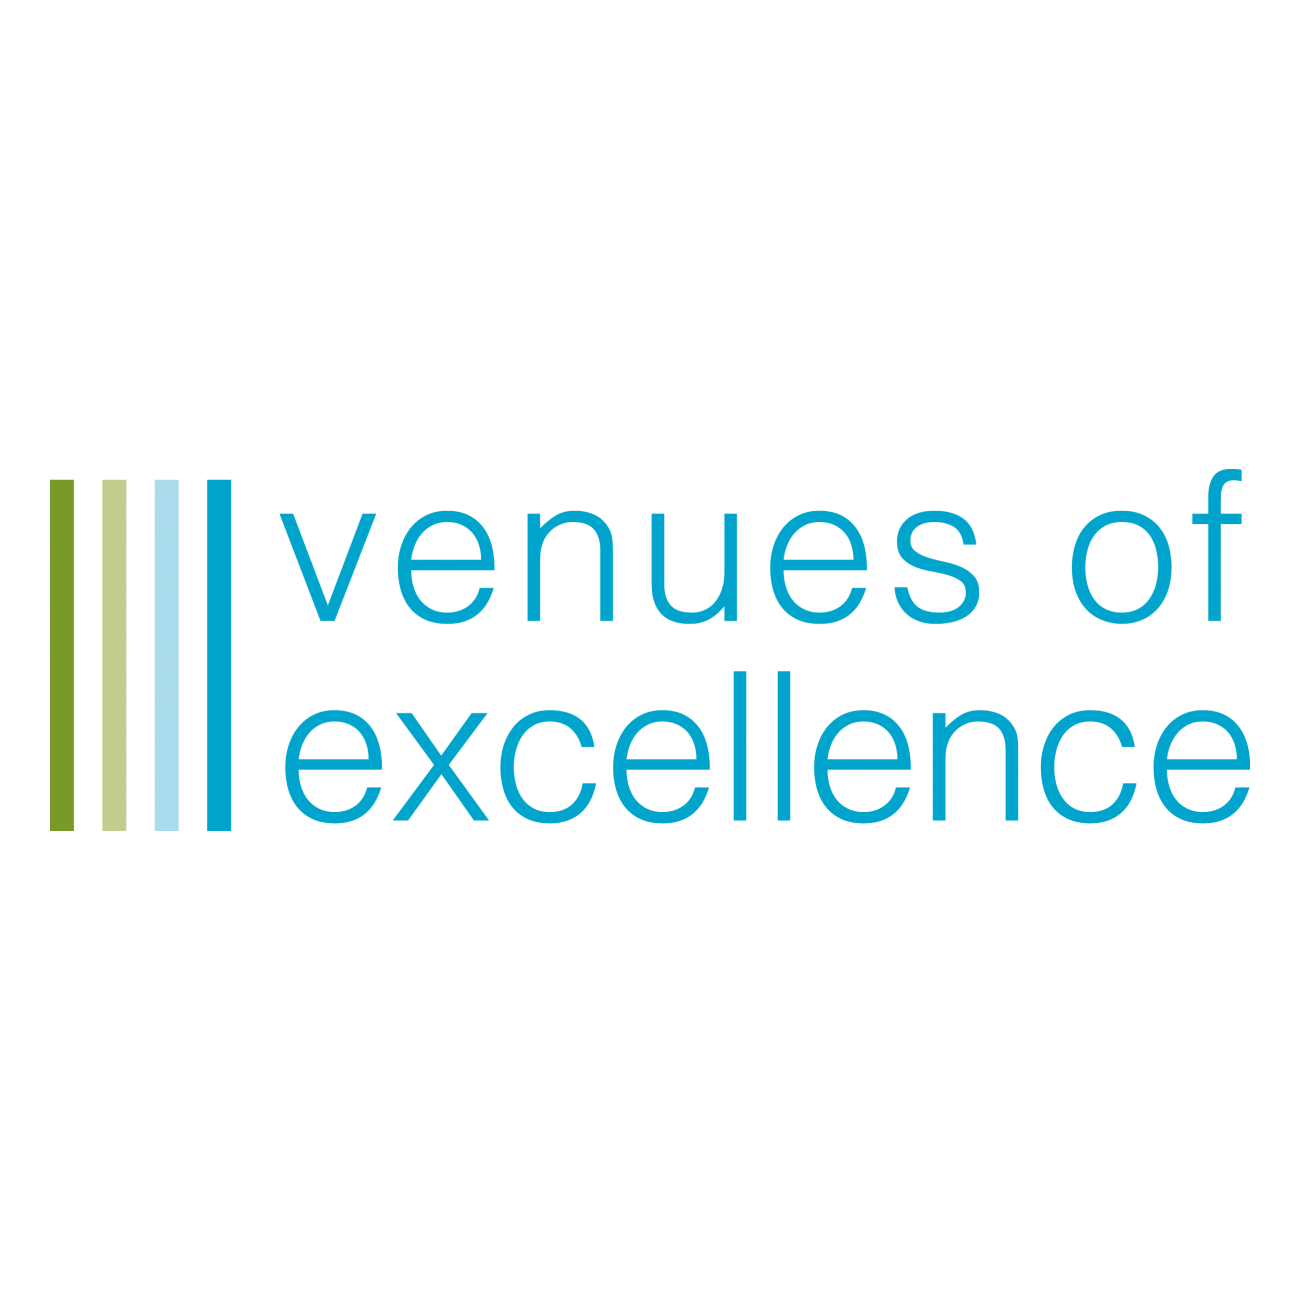 Venues of excellence